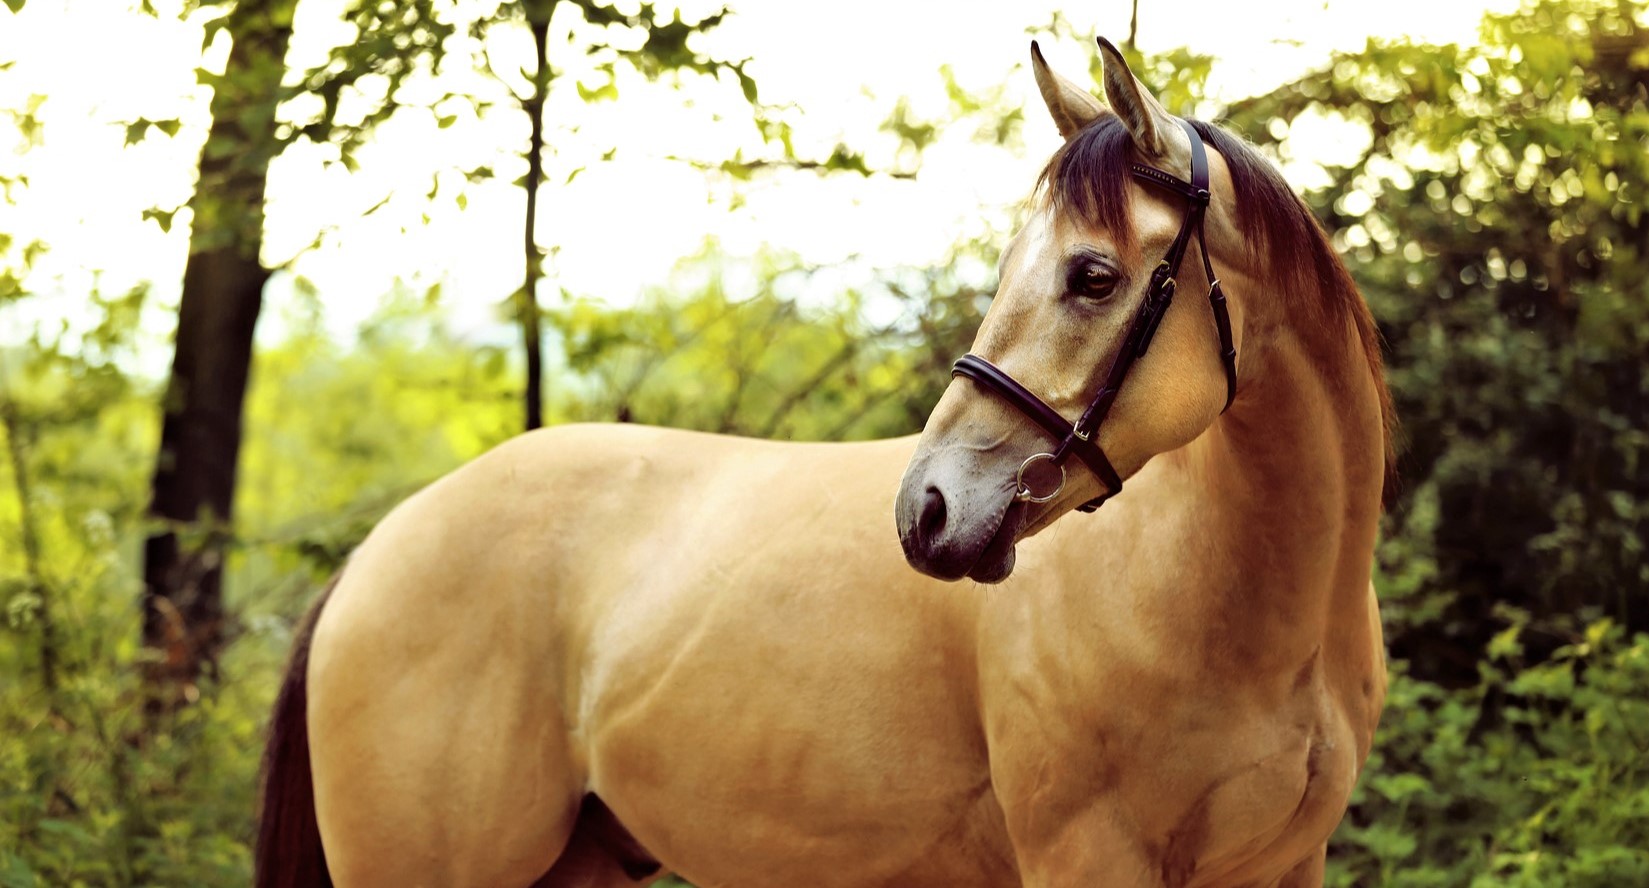 6 Facts You Didn’t Know About the American Quarter Horse